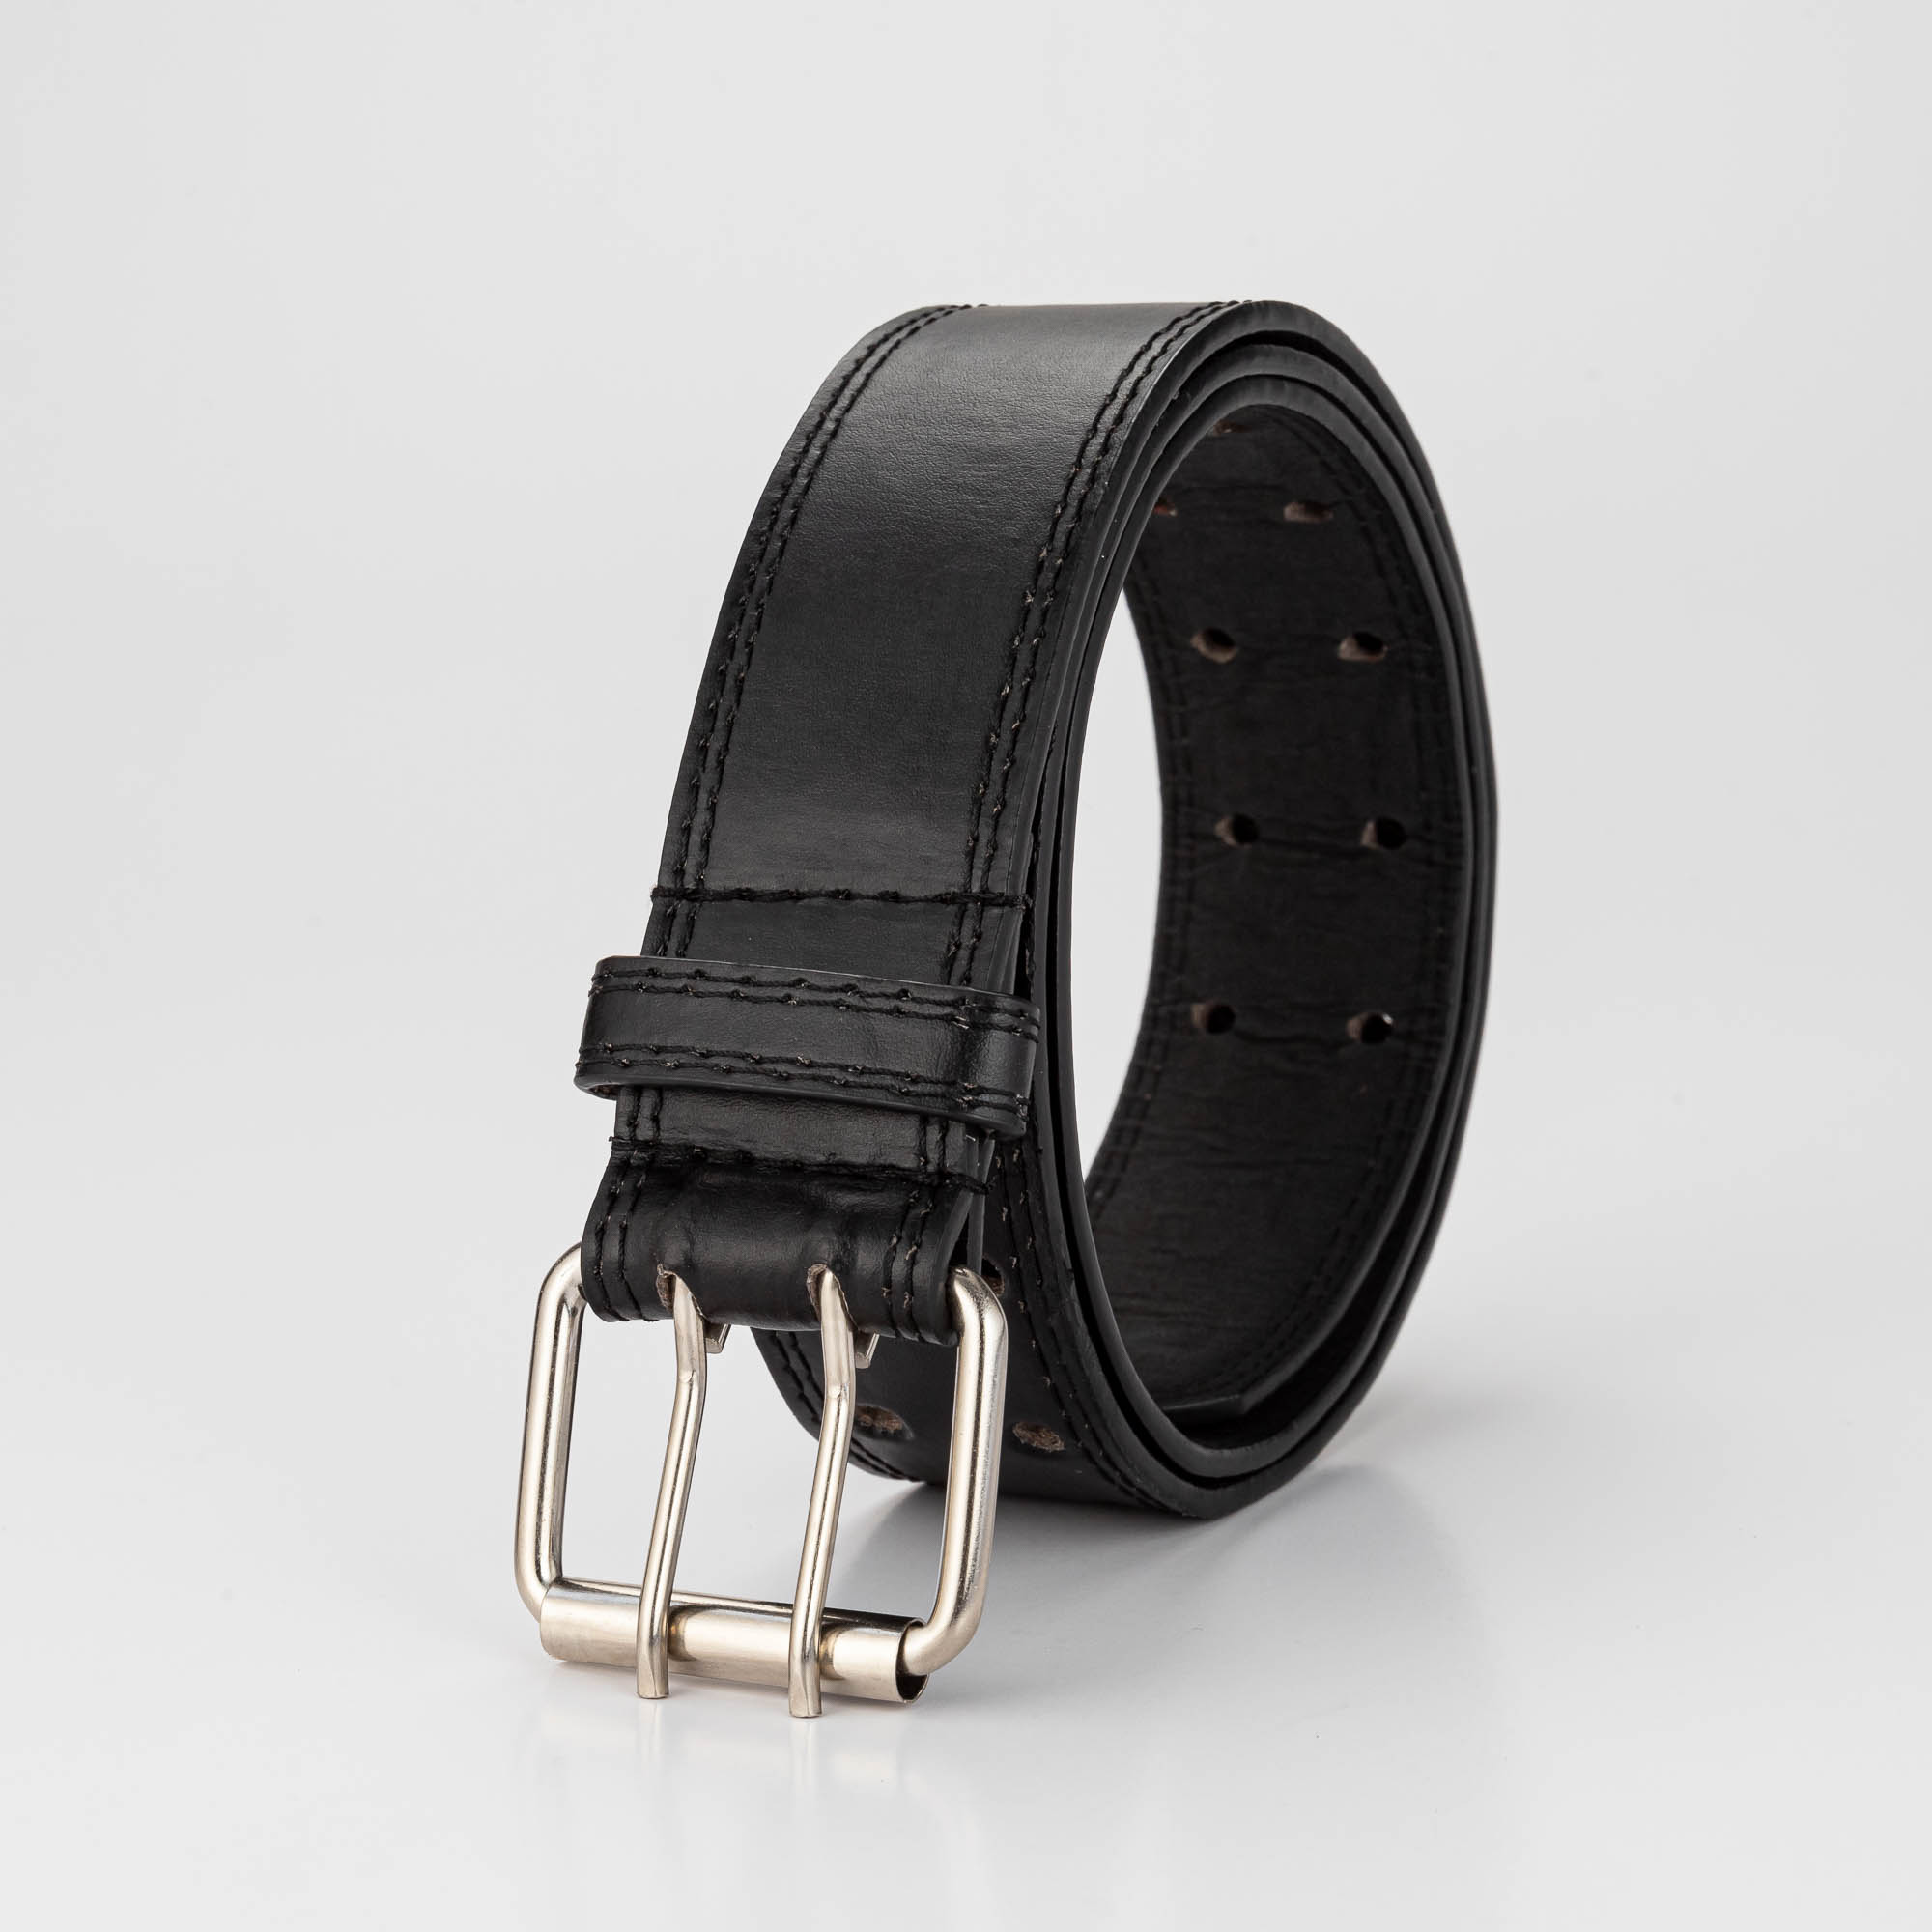 1pc Black Pu Leather Two Hole Adjustable Buckle Belt For Jeans